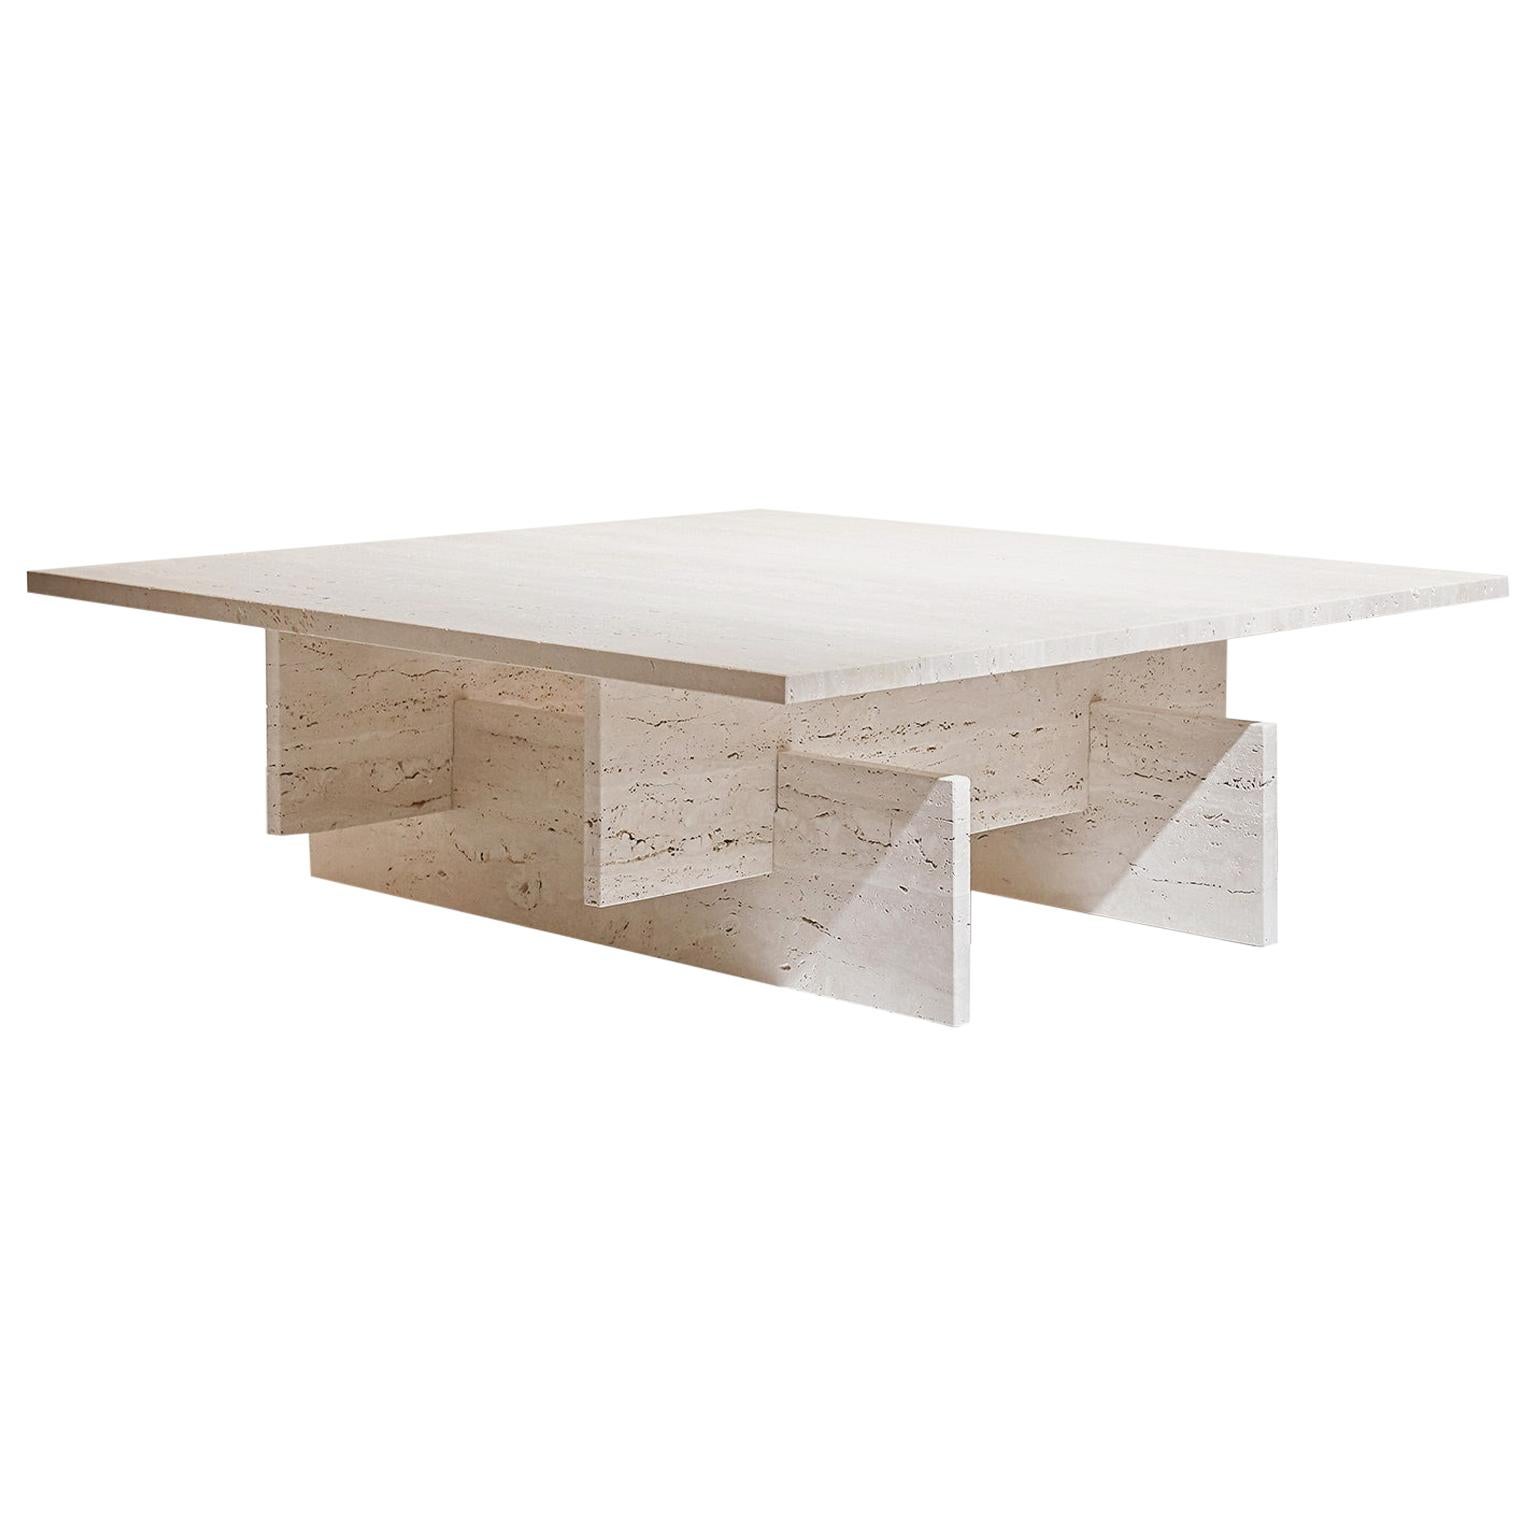 “Fit Table” Minimalist Travertine Marble Coffee Table by Aparentment